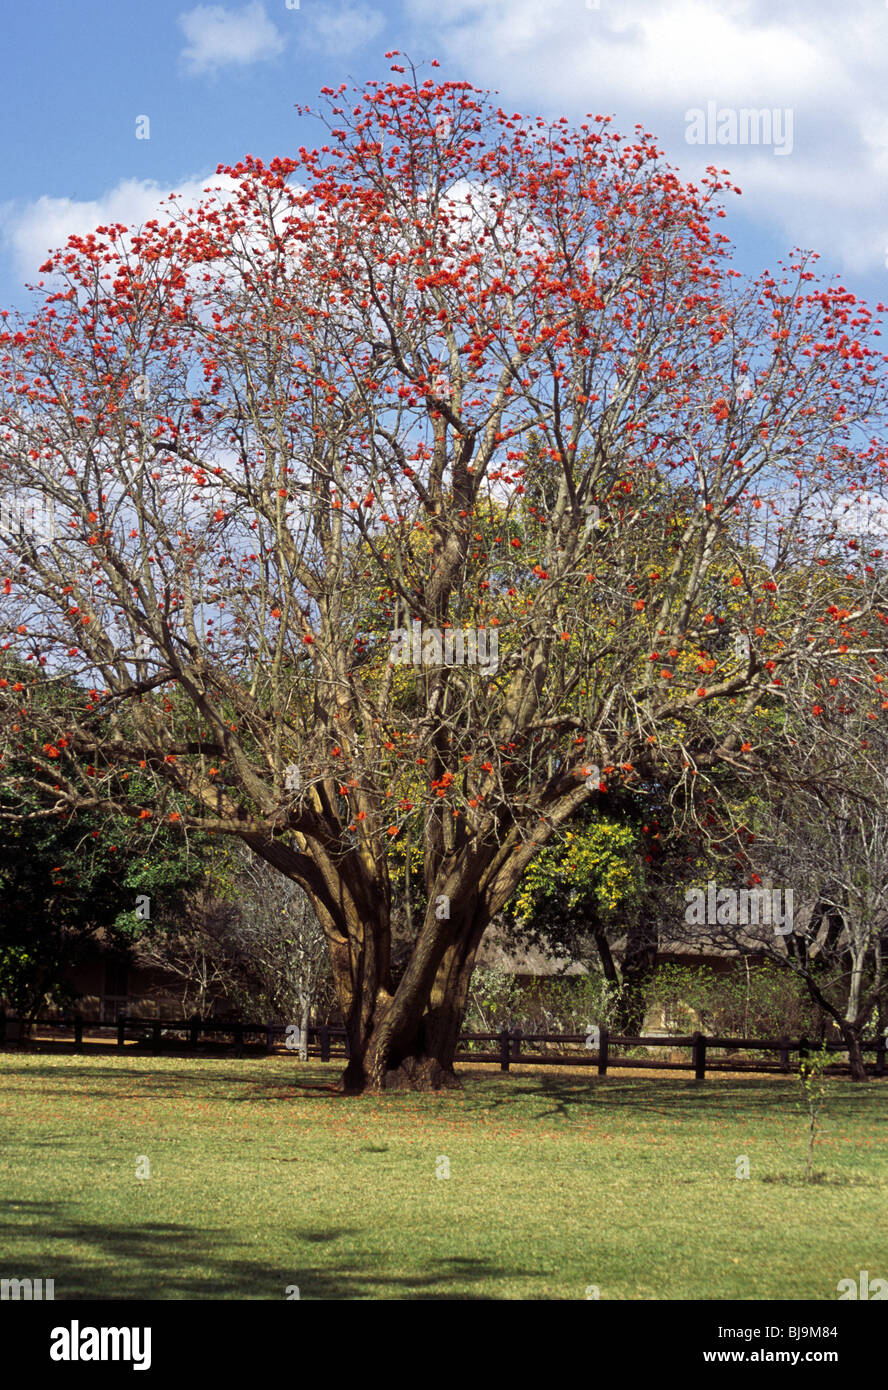 A Common Coral Tree (Erythrina lysistemon), found in South Africa. Stock Photo